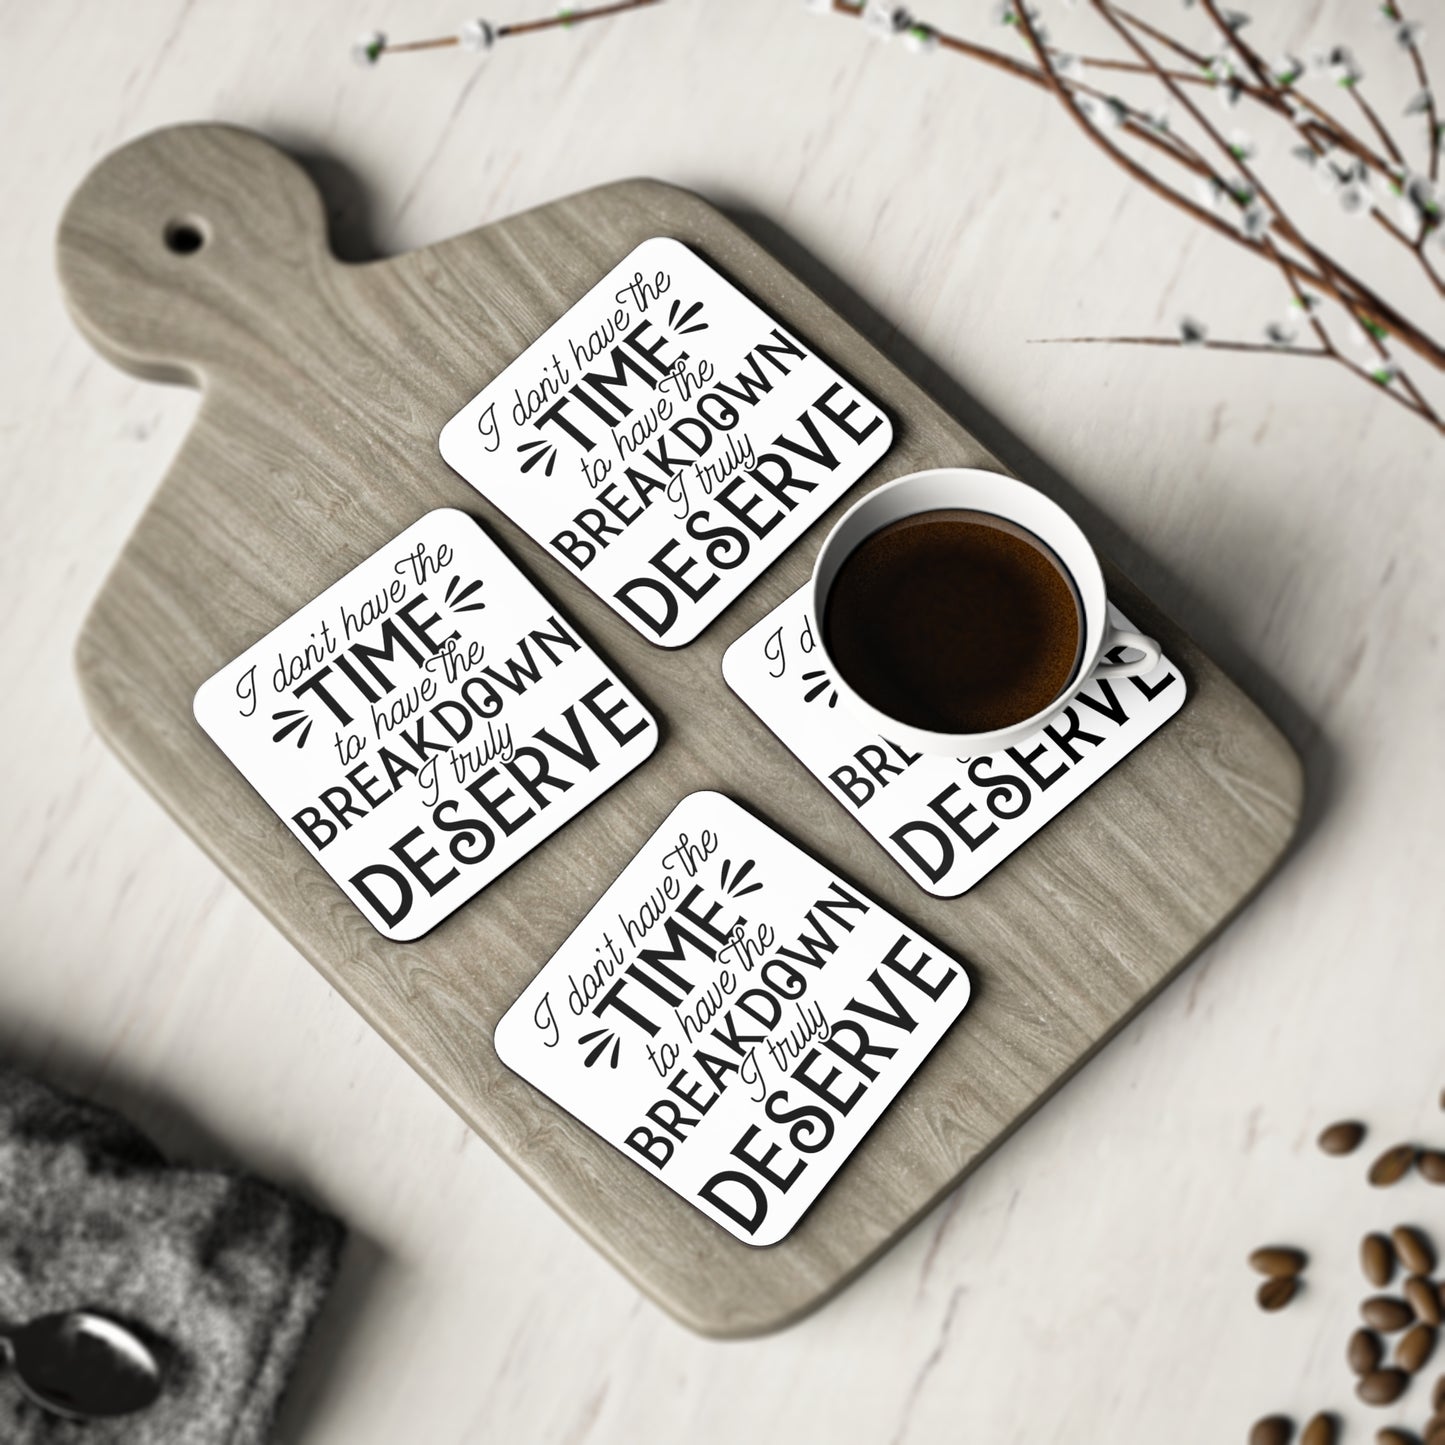 "I Dont Have The Time For The Breakdown I Truly Deserve" Square Coasters